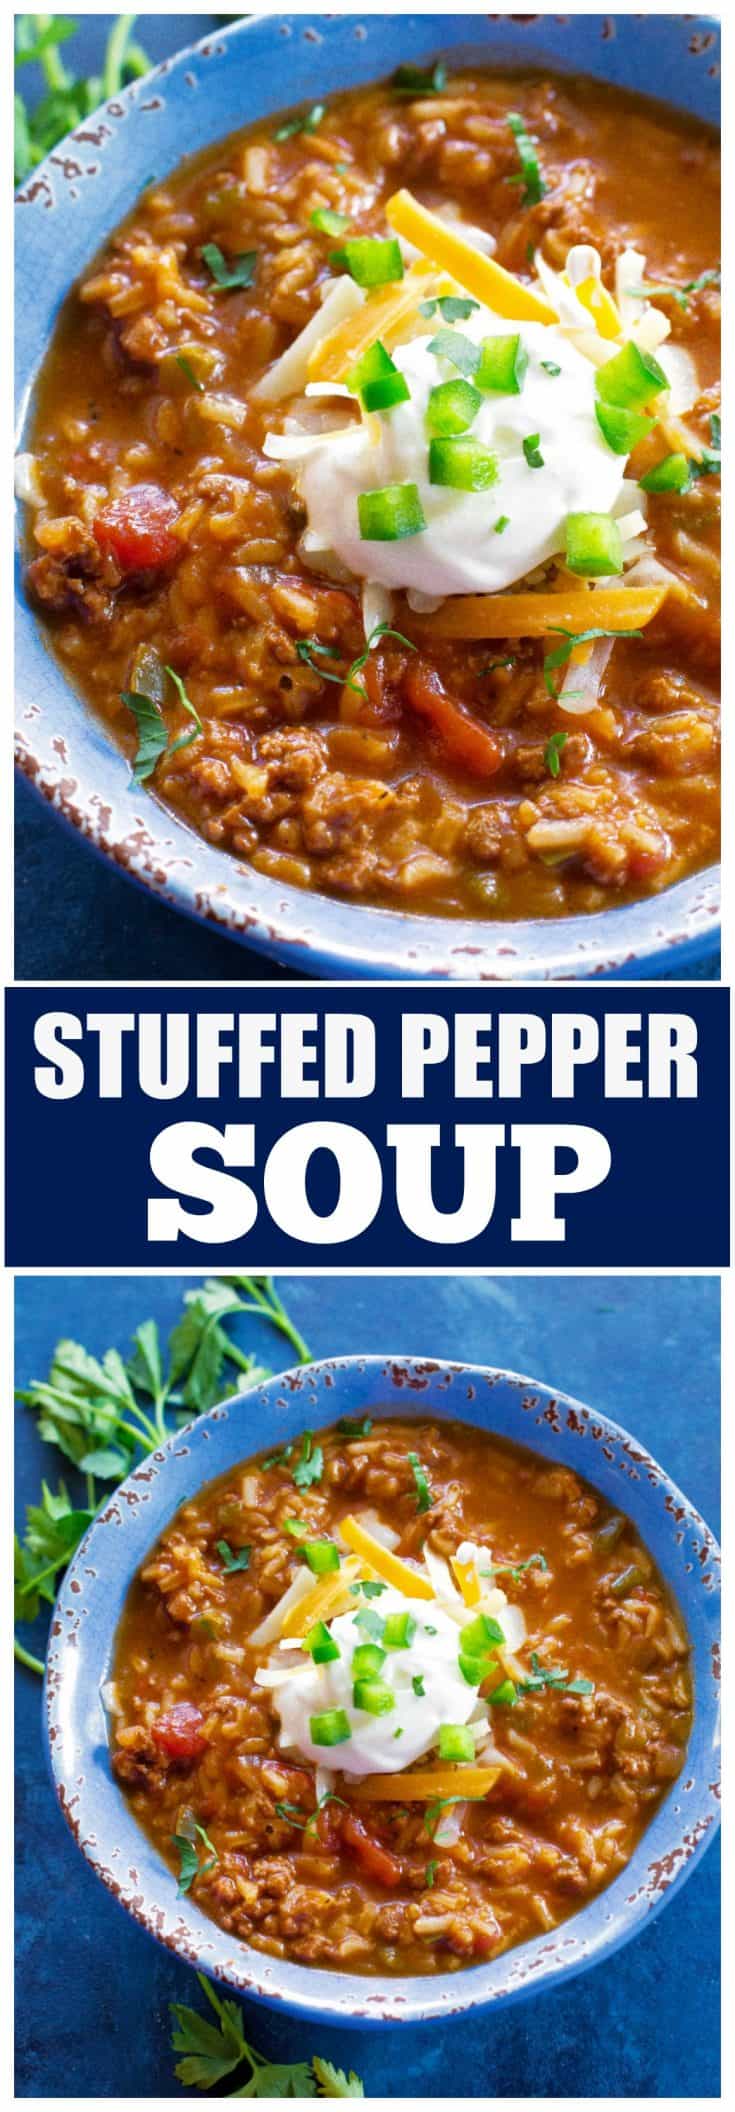 Stuffed Pepper Soup | The Girl Who Ate Everything